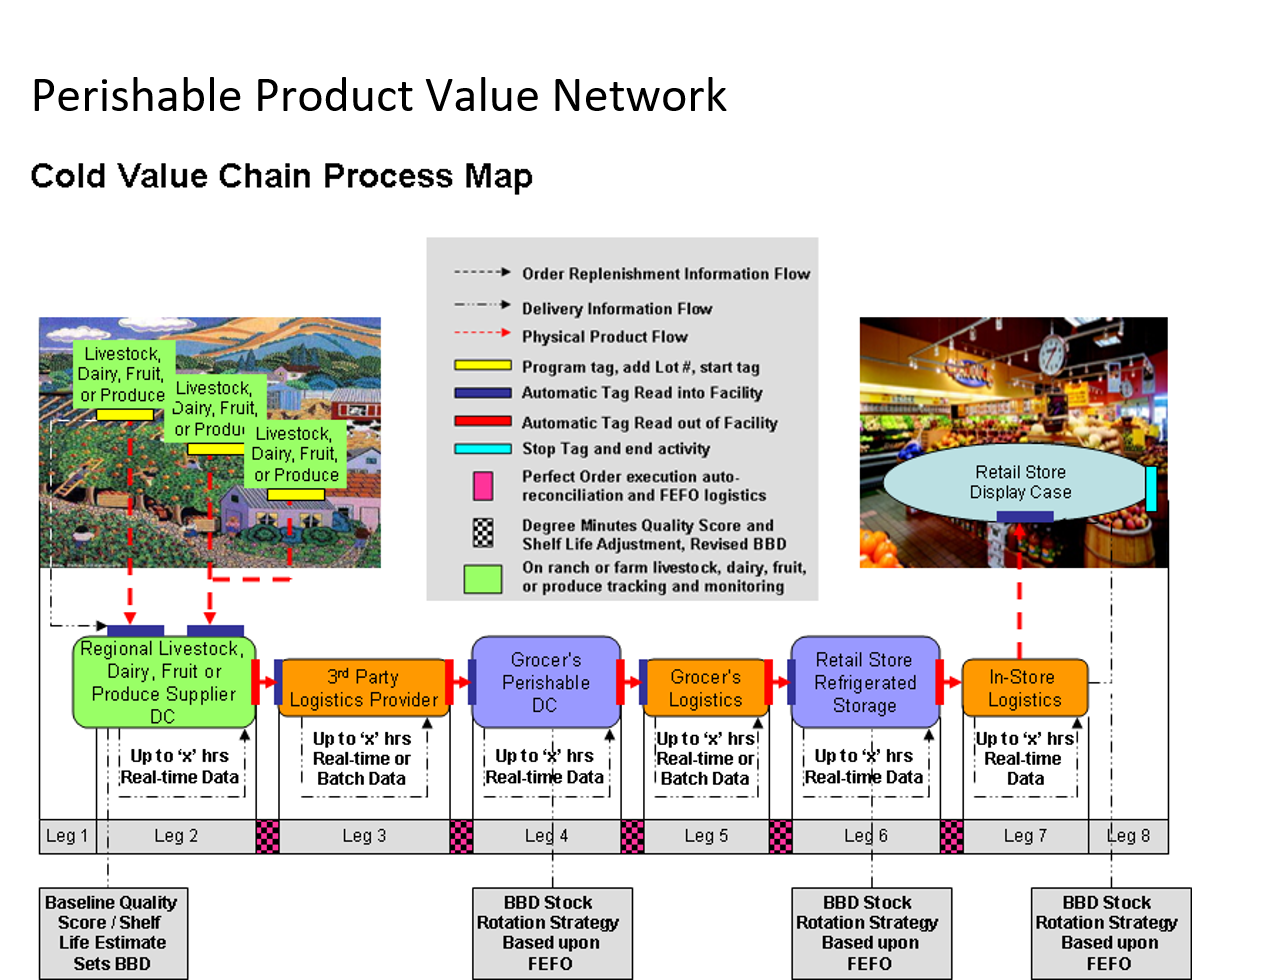 Cold Value Chain Process Map.png